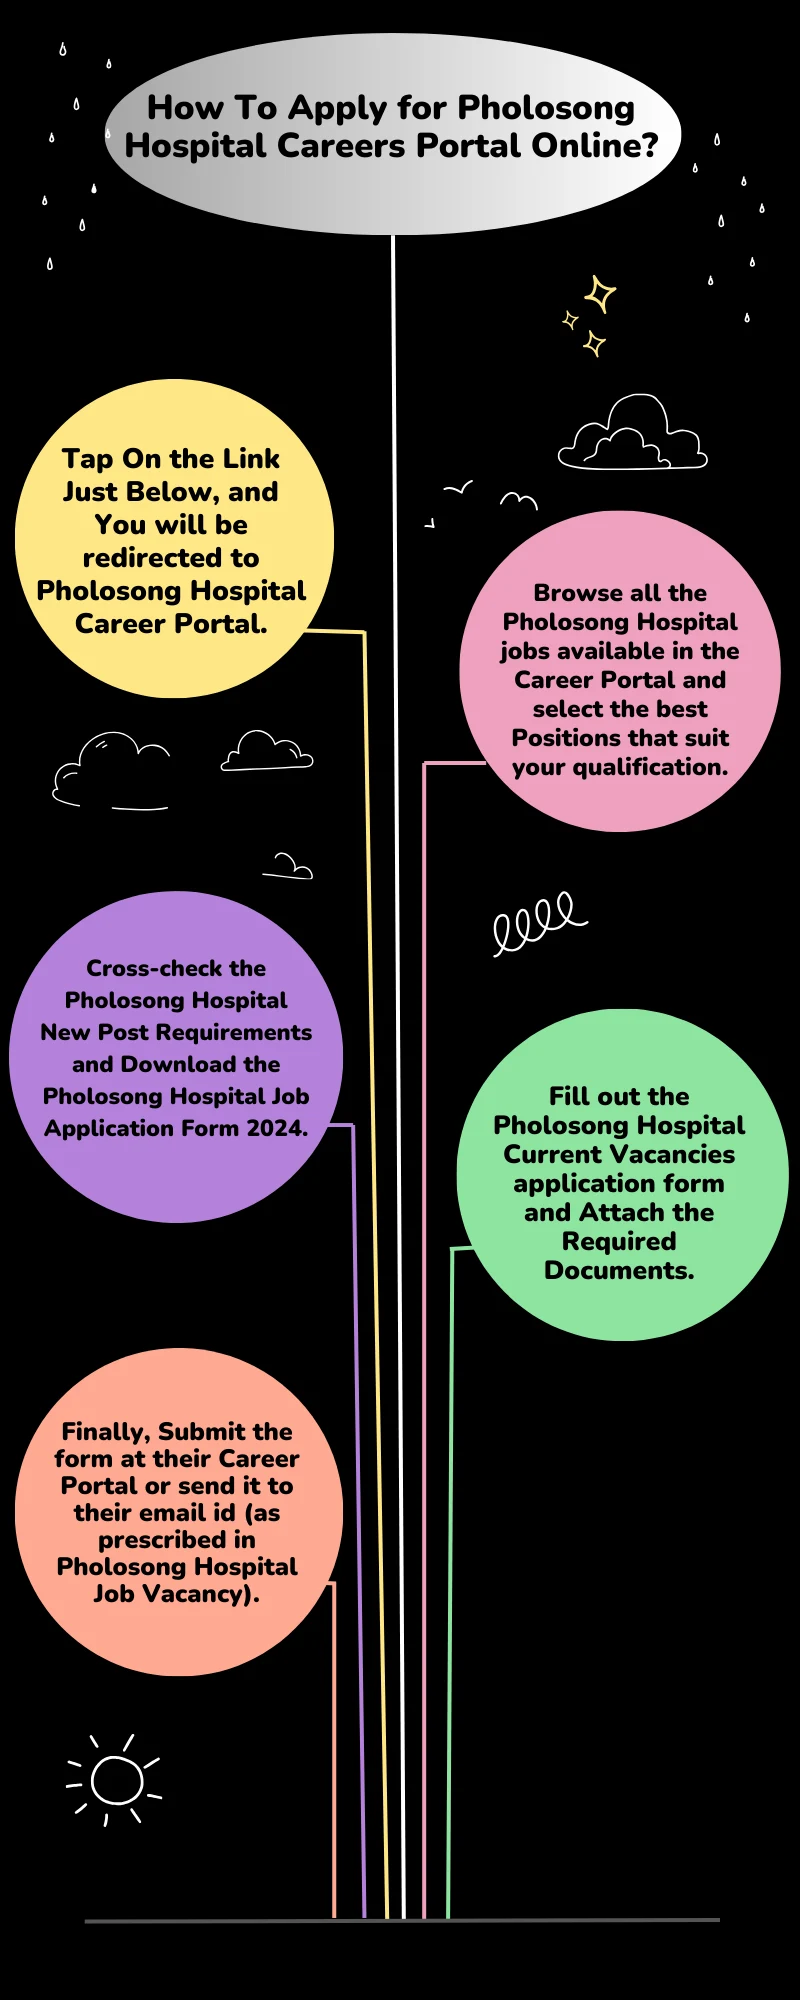 How To Apply for Pholosong Hospital Careers Portal Online?